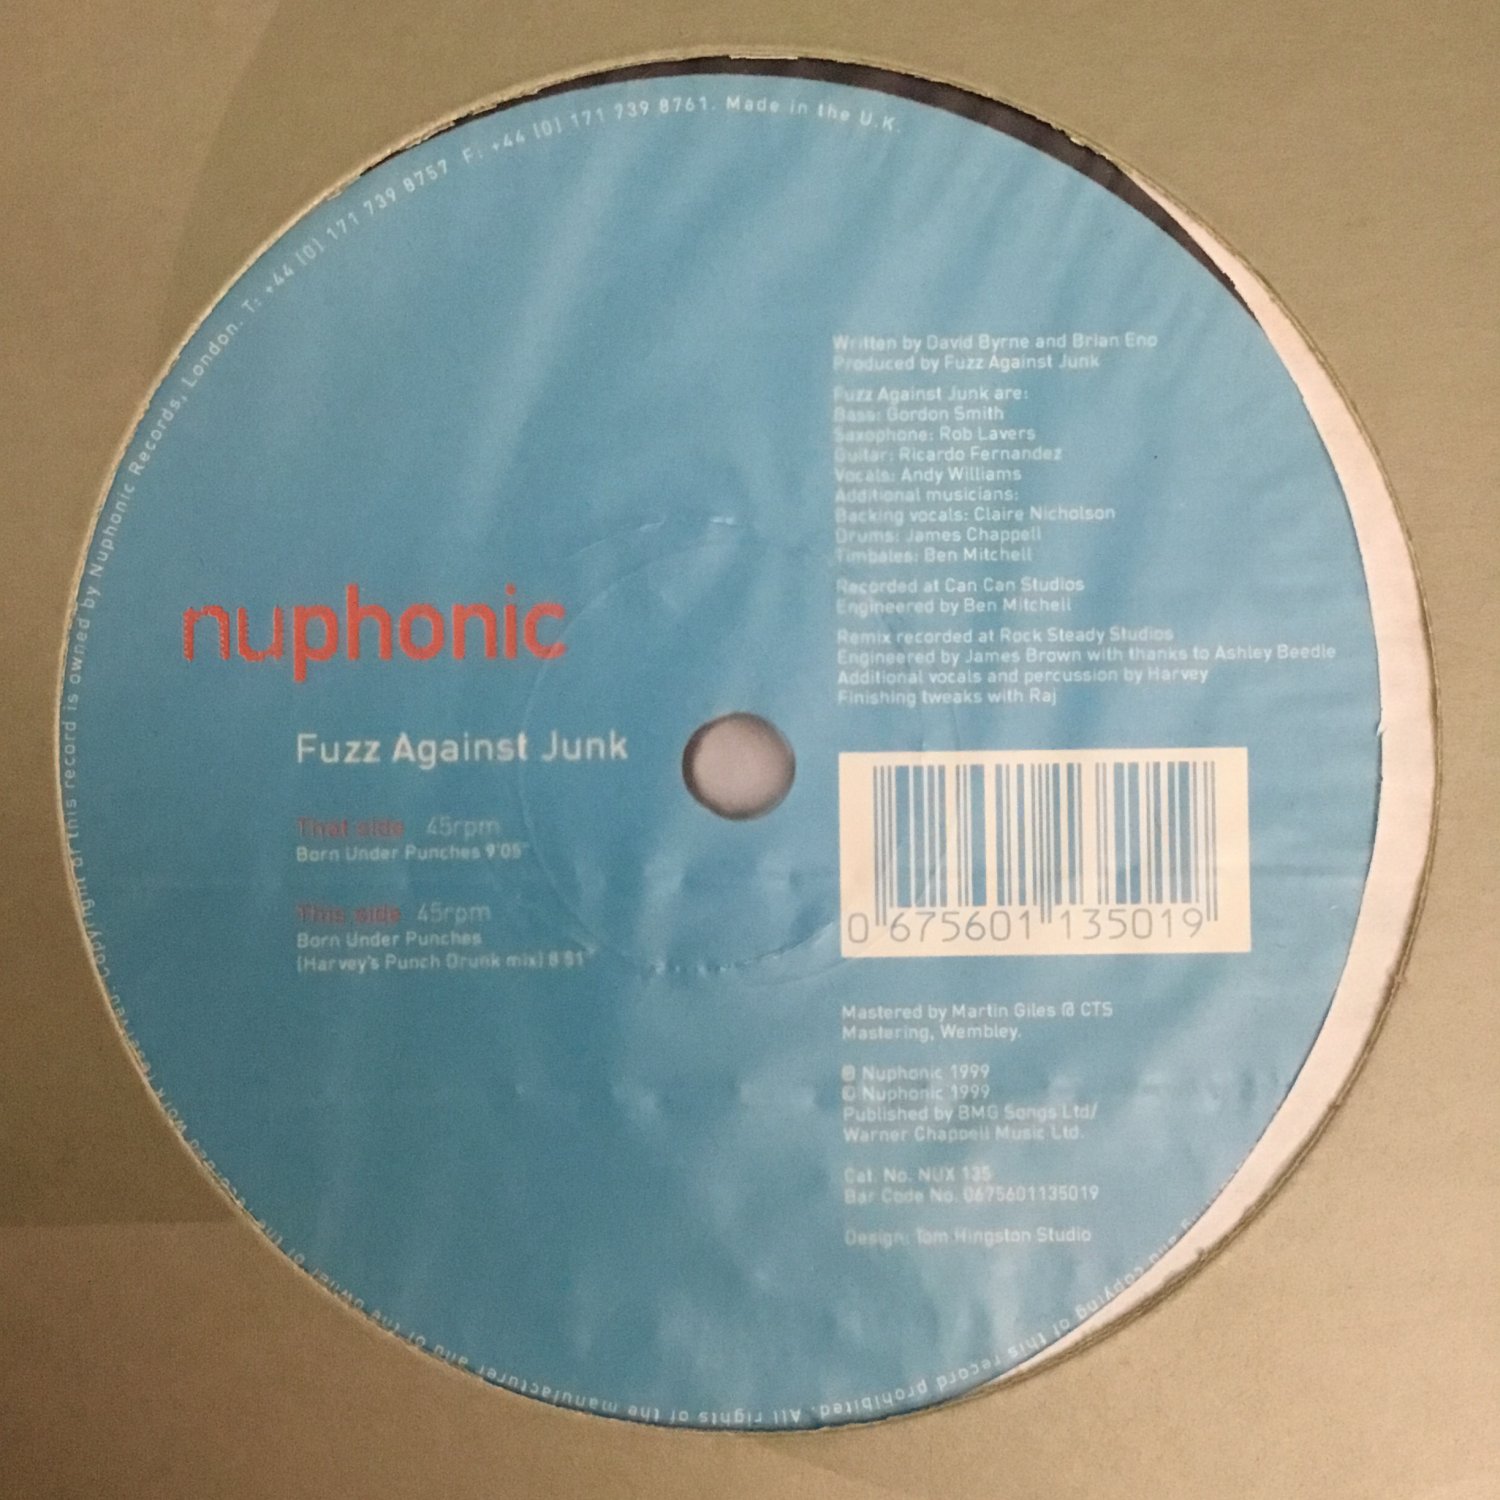 NUX135 - Fuzz Against Junk - Born Under Punches (12") NUPHONIC